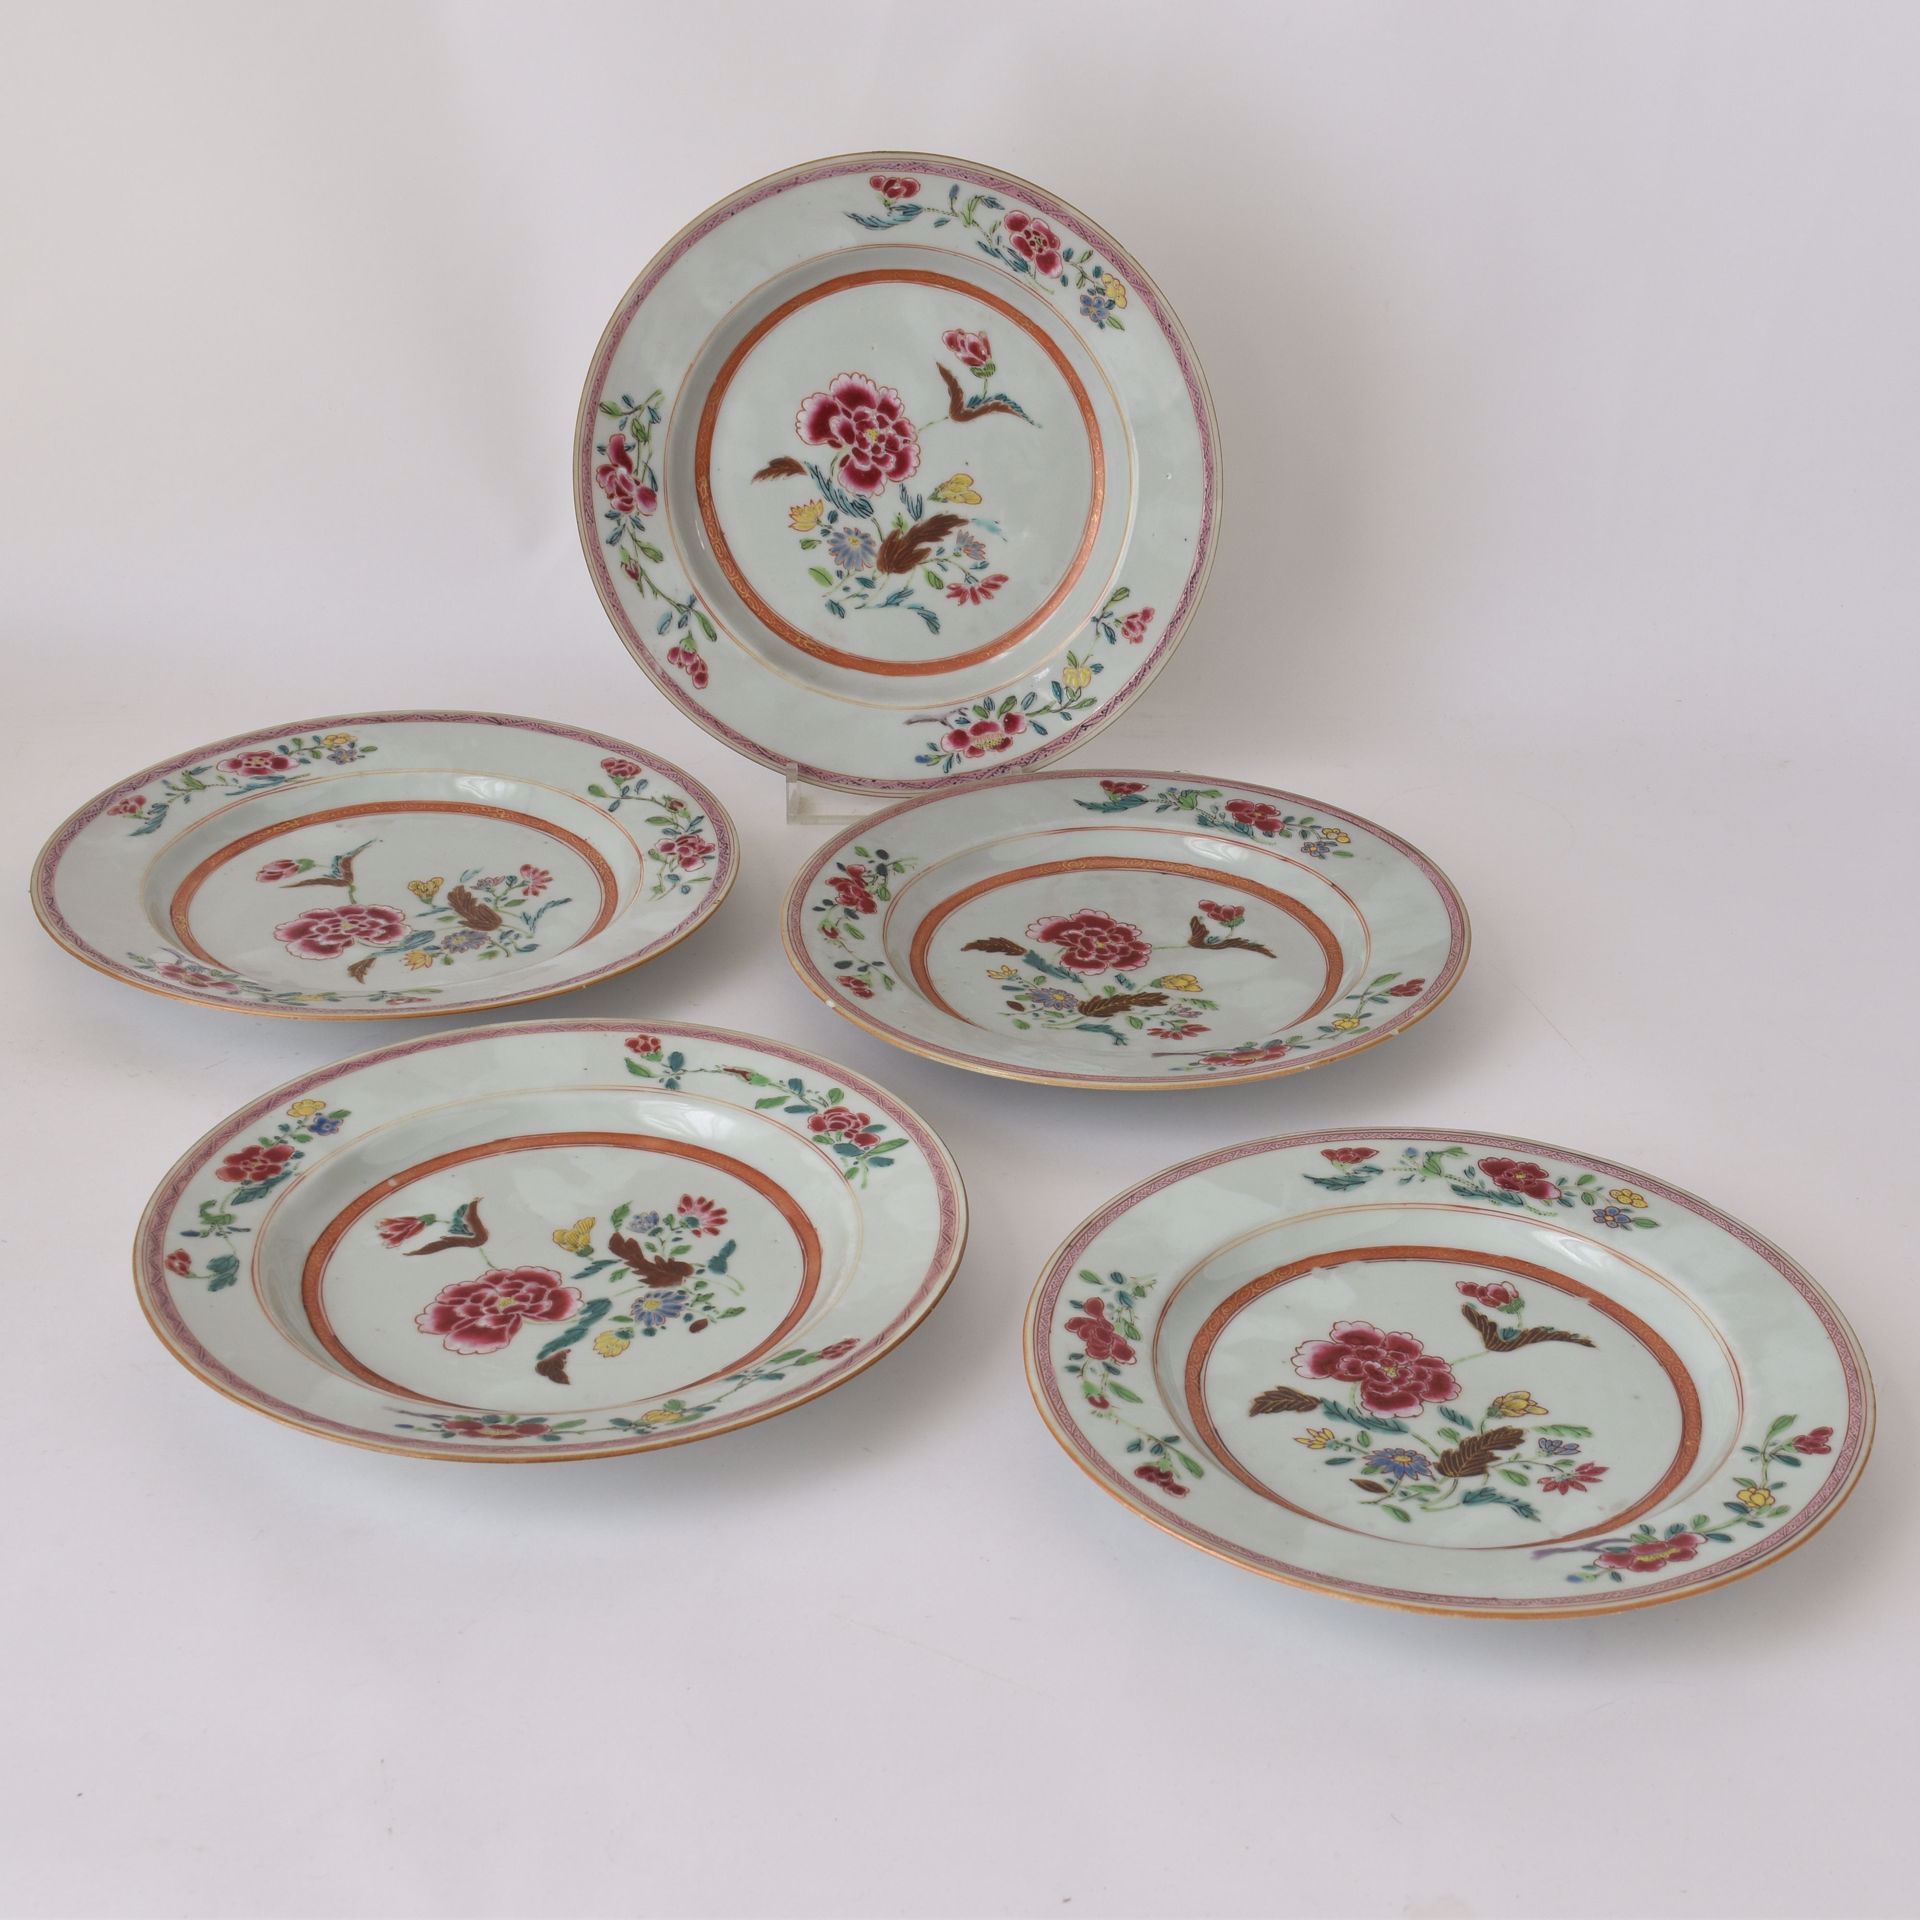 FIVE PLATES decorated with flowering branches. Kien Long era (minor injury).